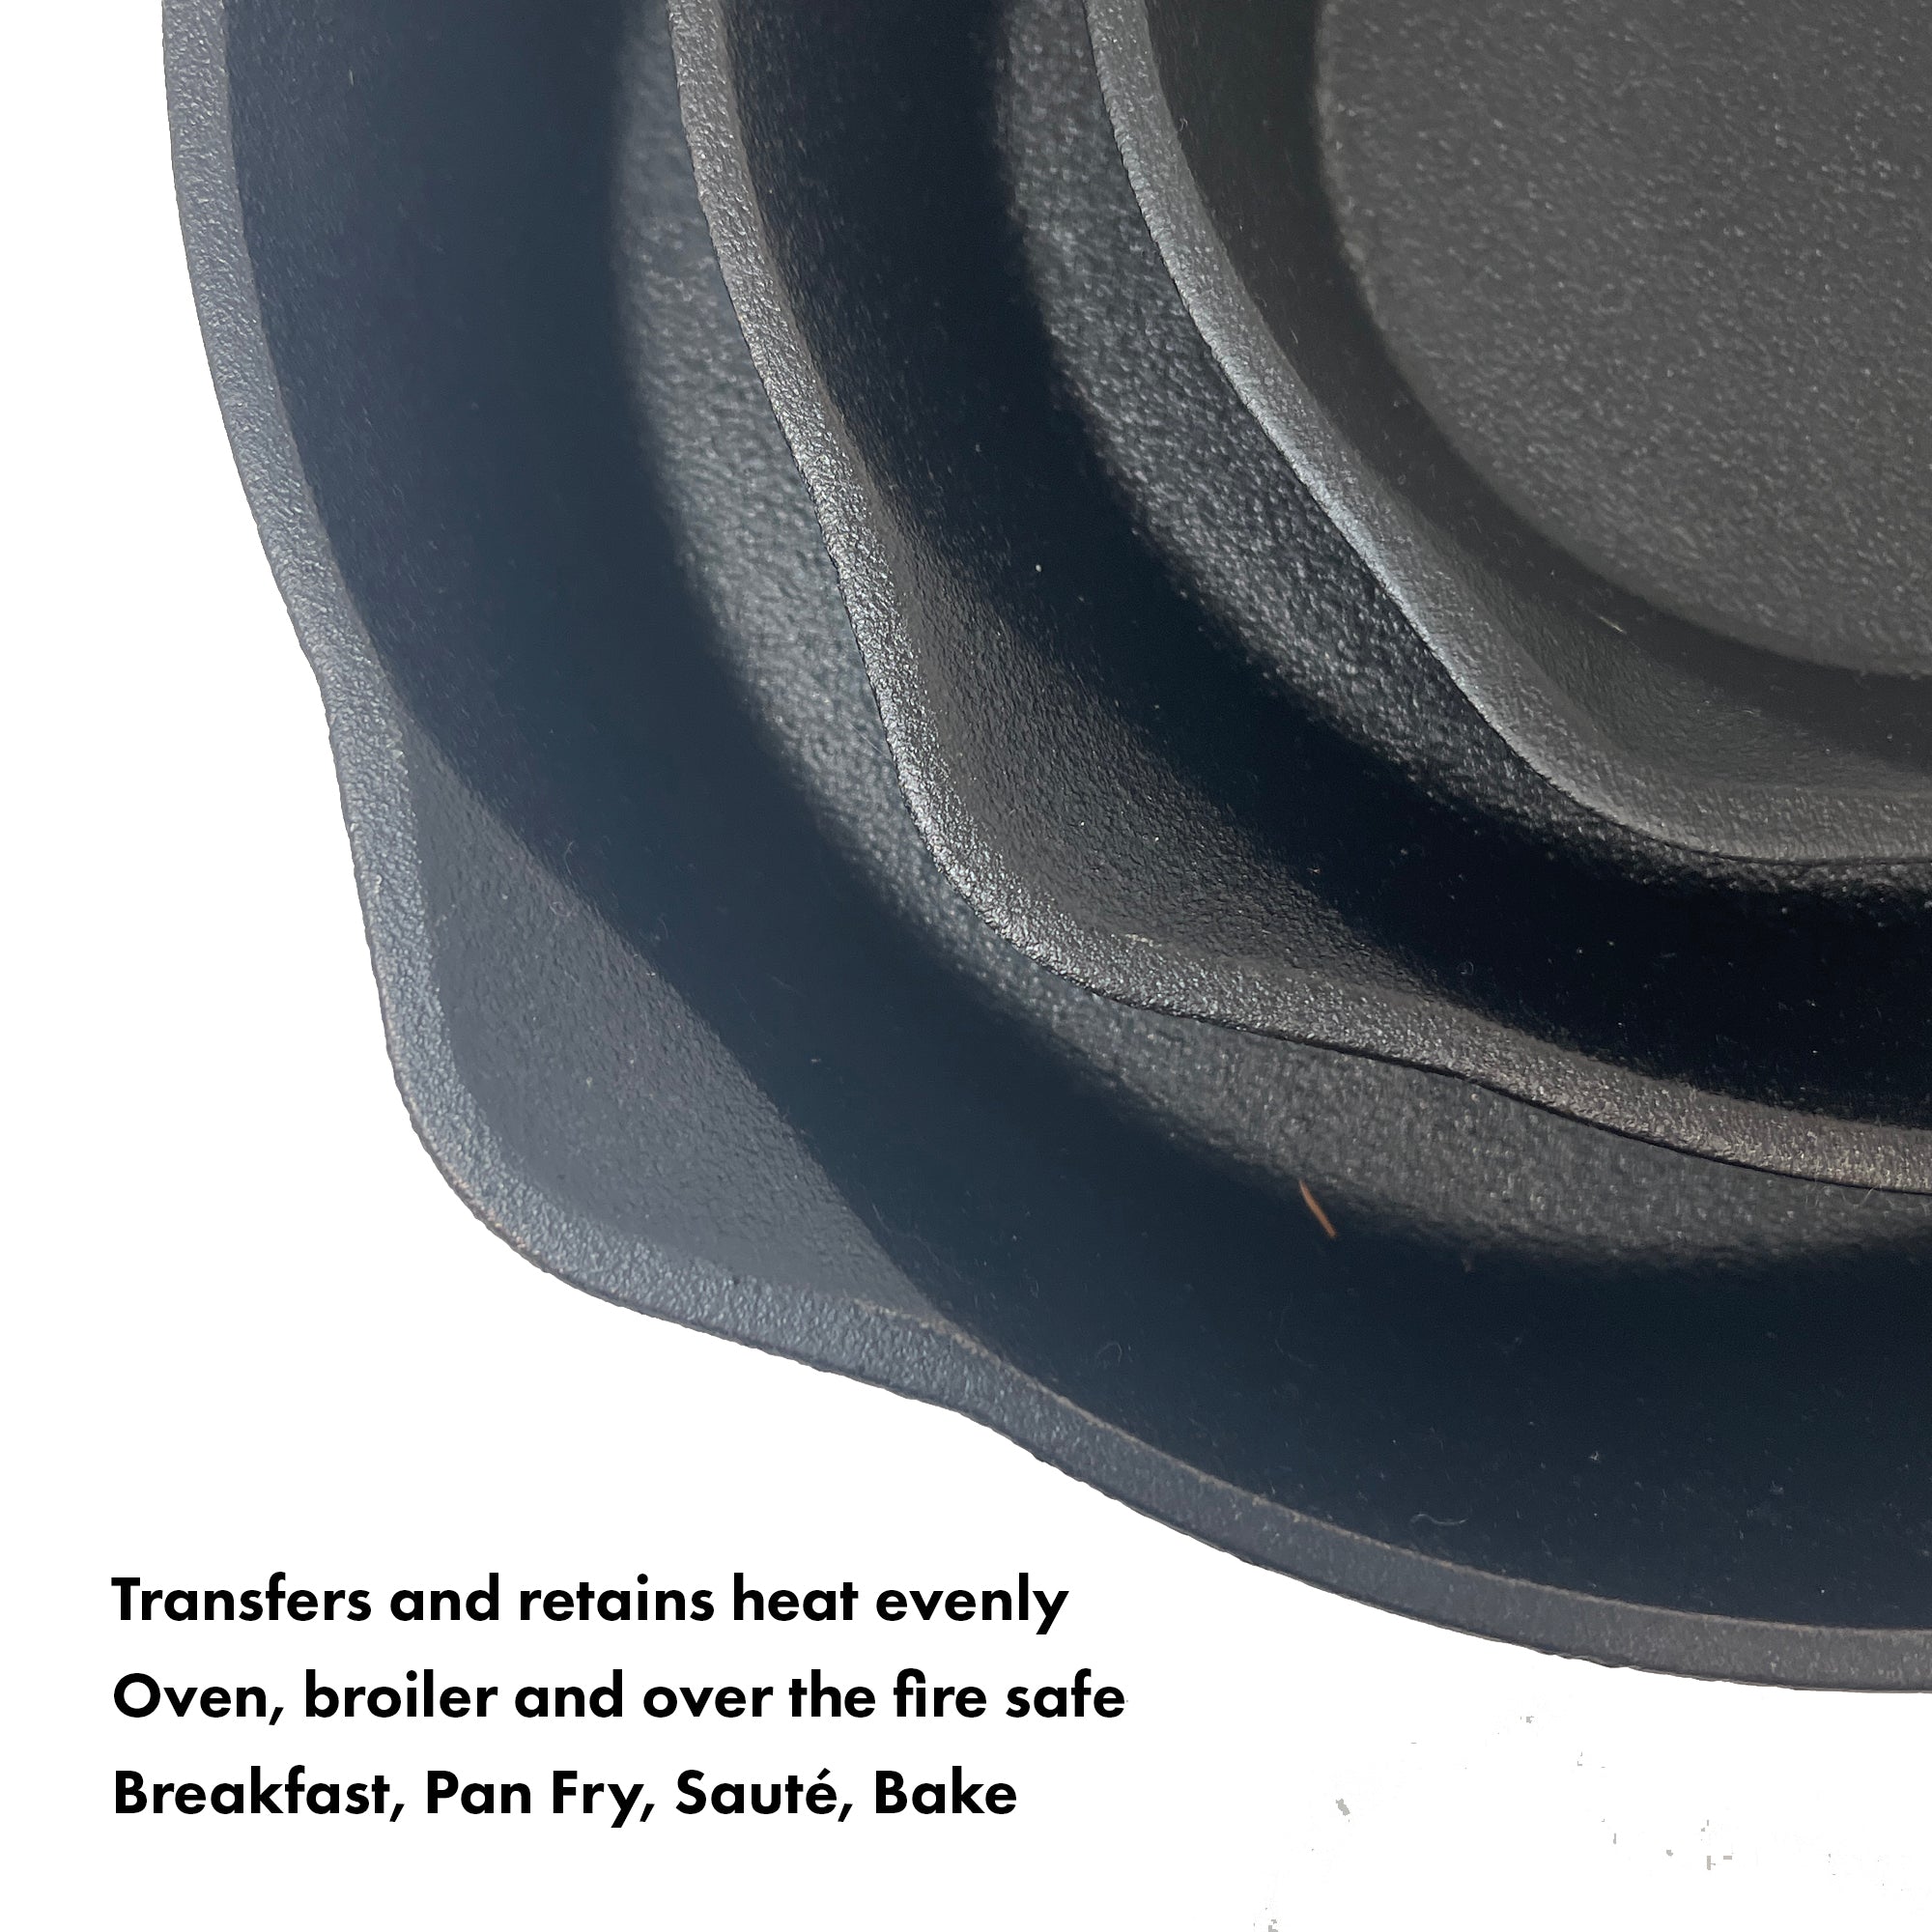 10-in, 12-in, and 14-in Cast Iron Skillet Set